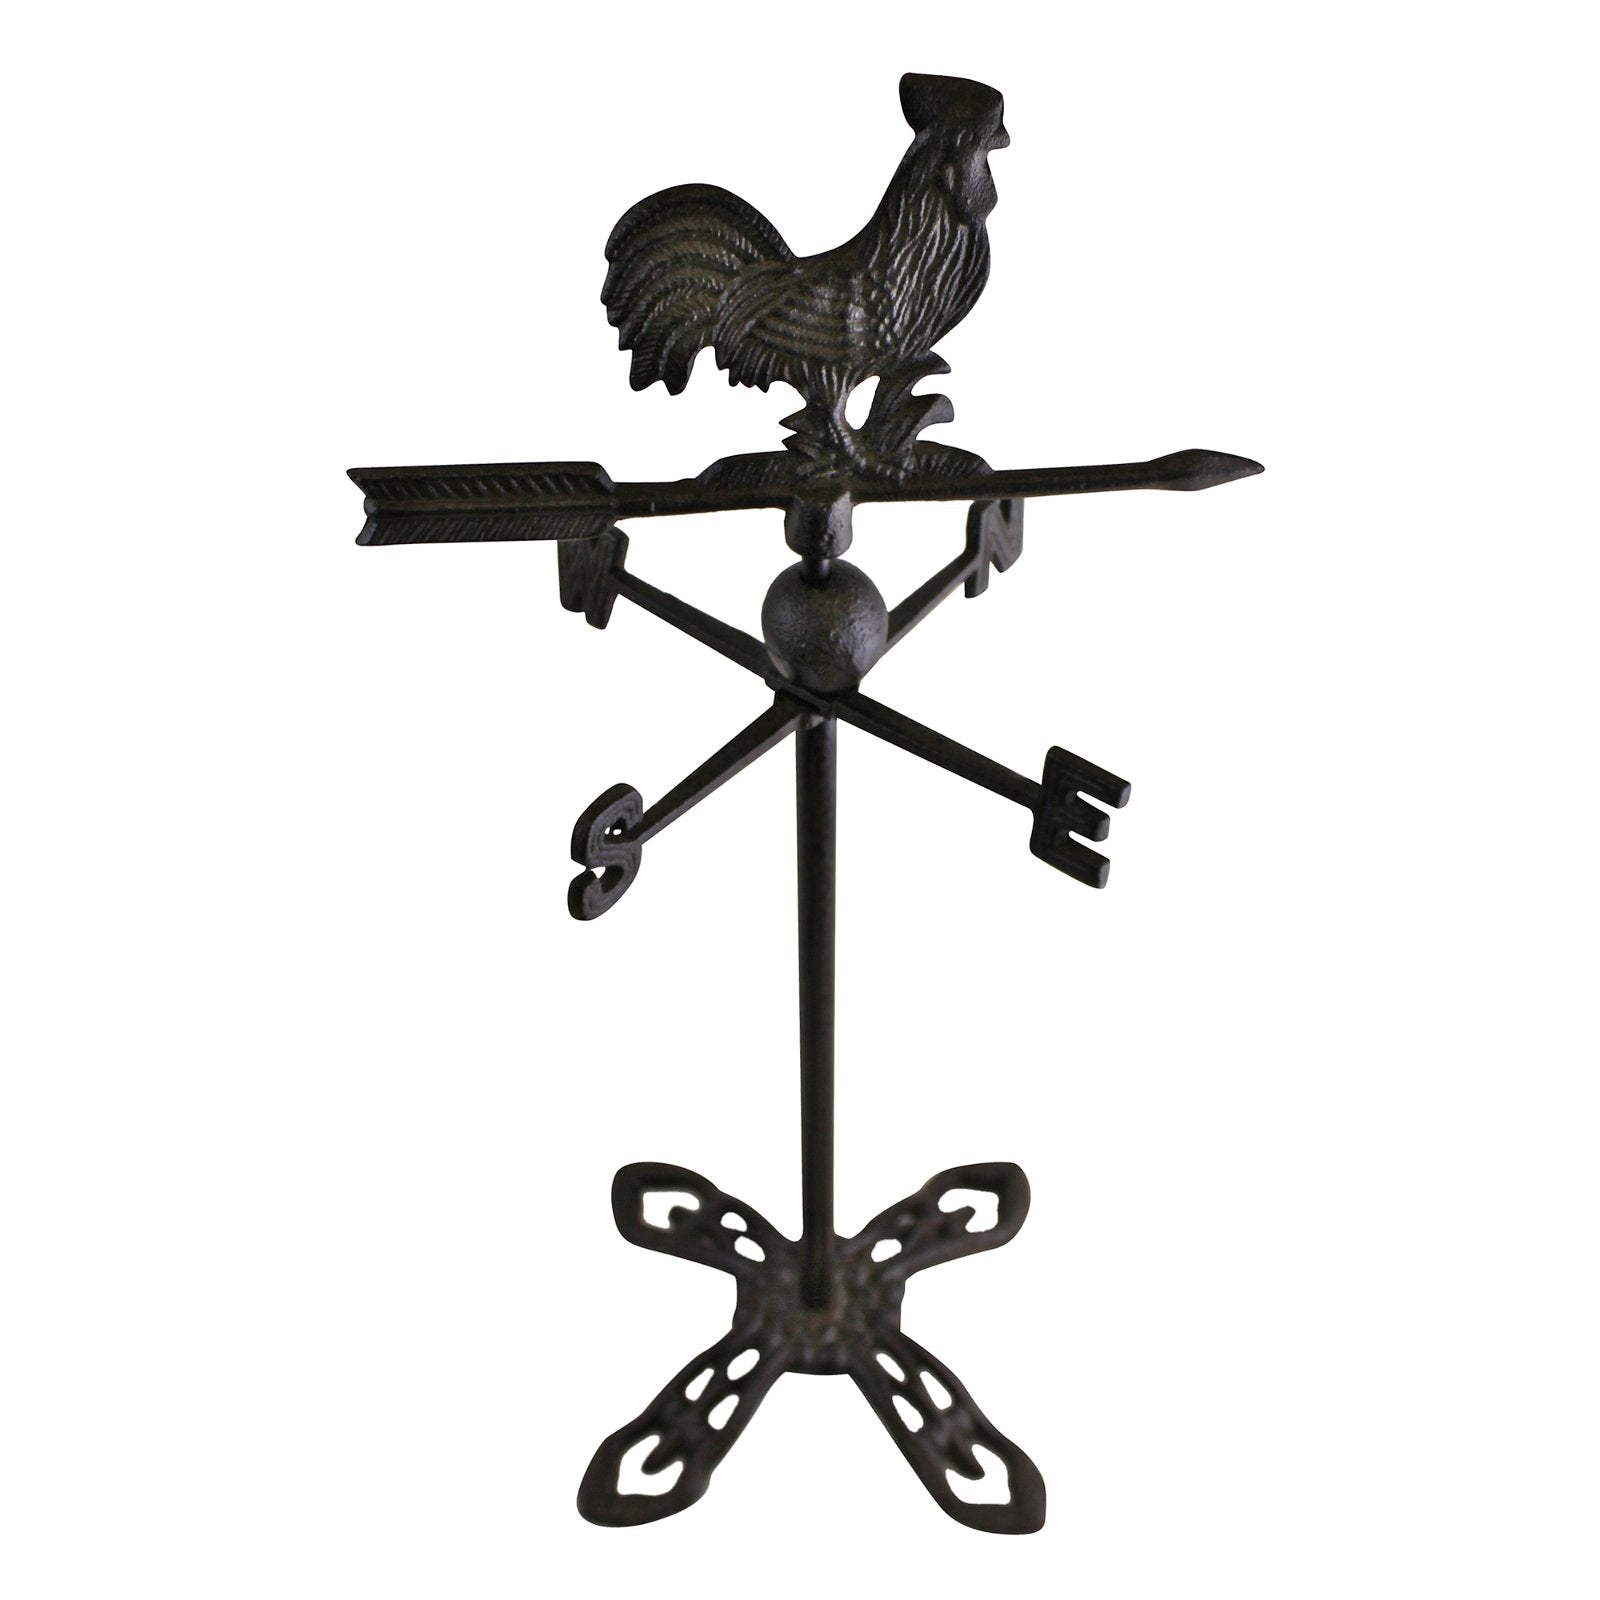 Cast Iron Freestanding Small Weather Vane, Rooster Design